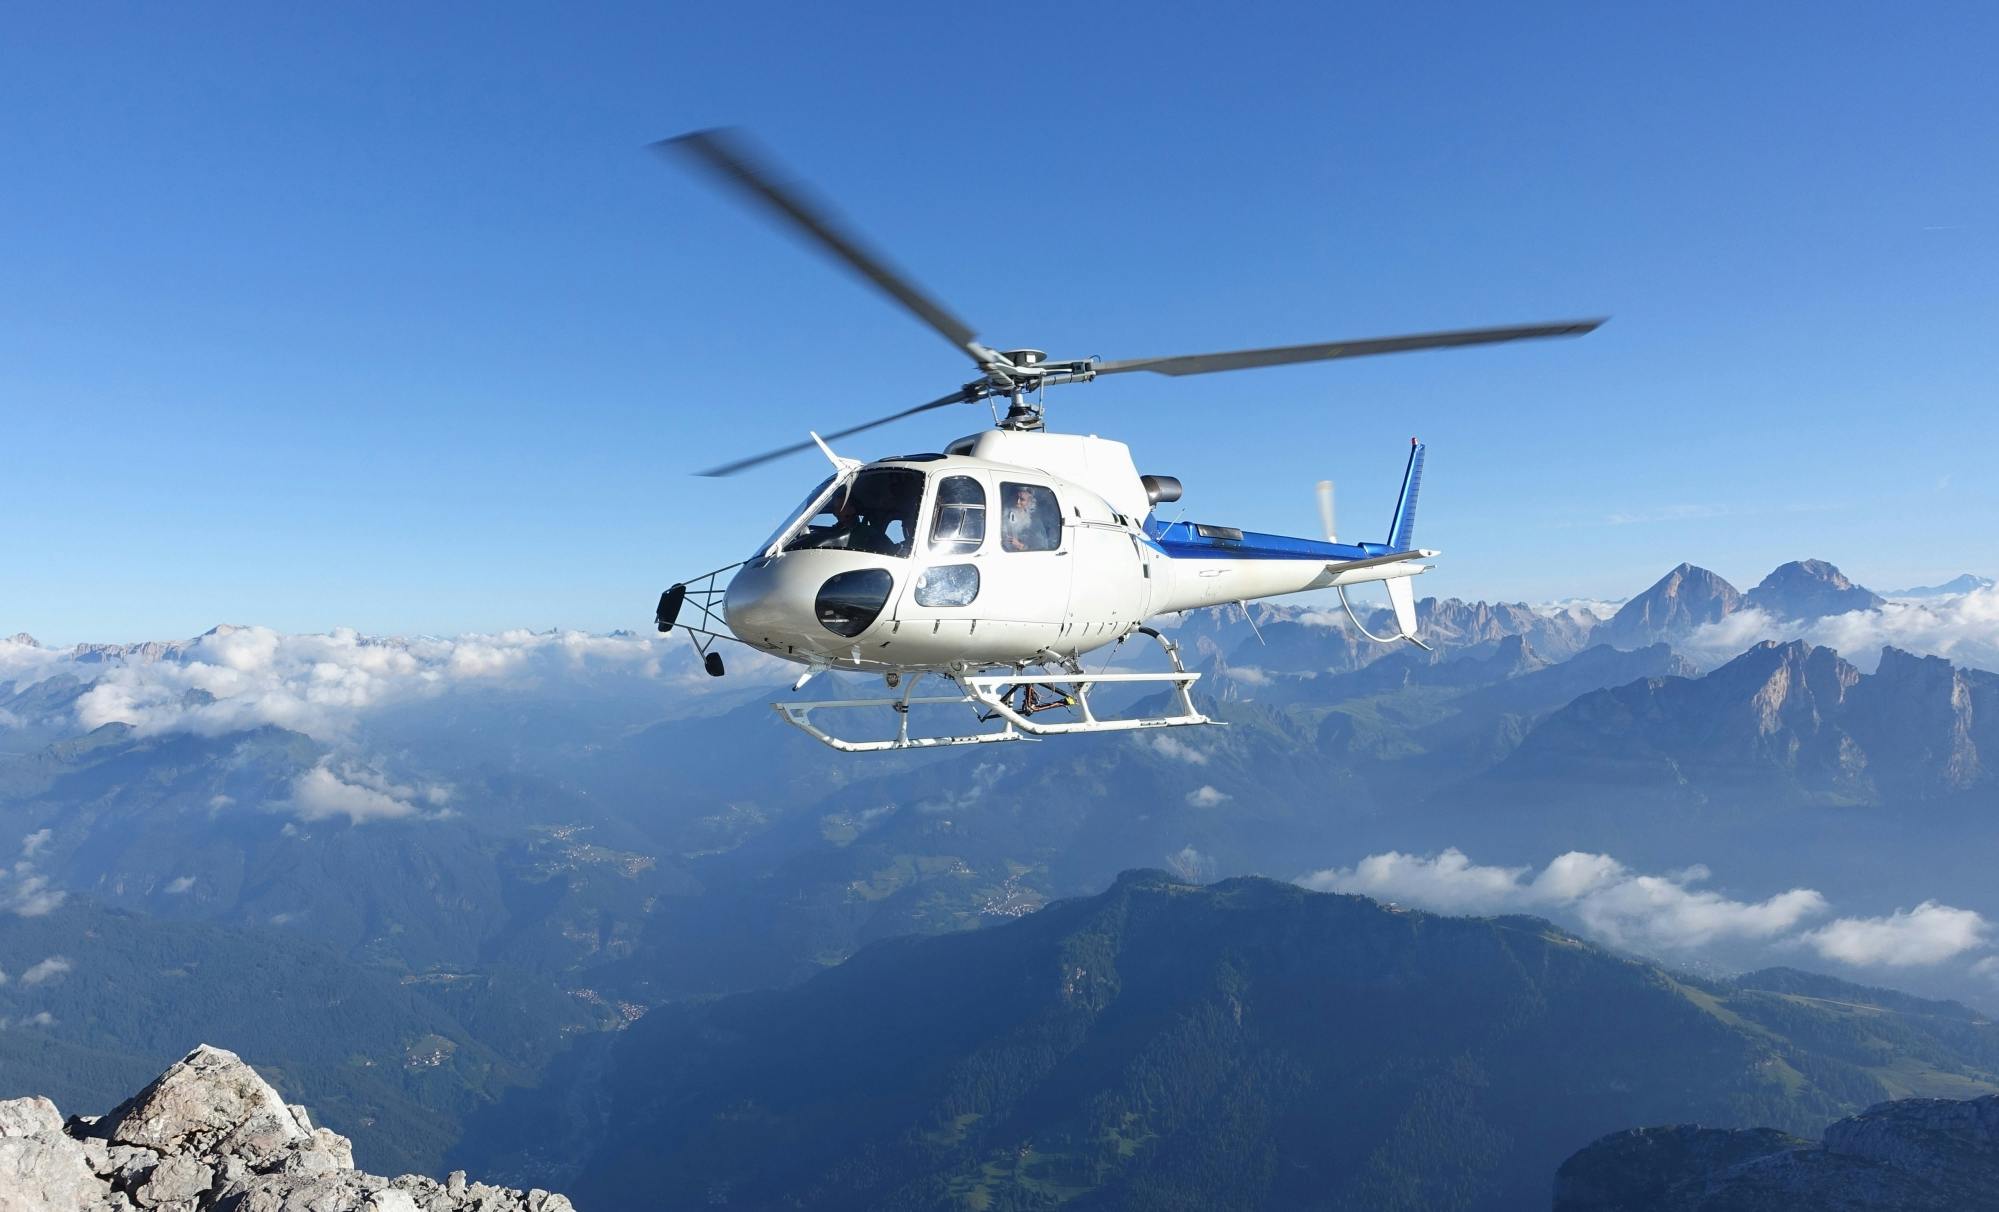 Private helicopter tour to Matterhorn Musement